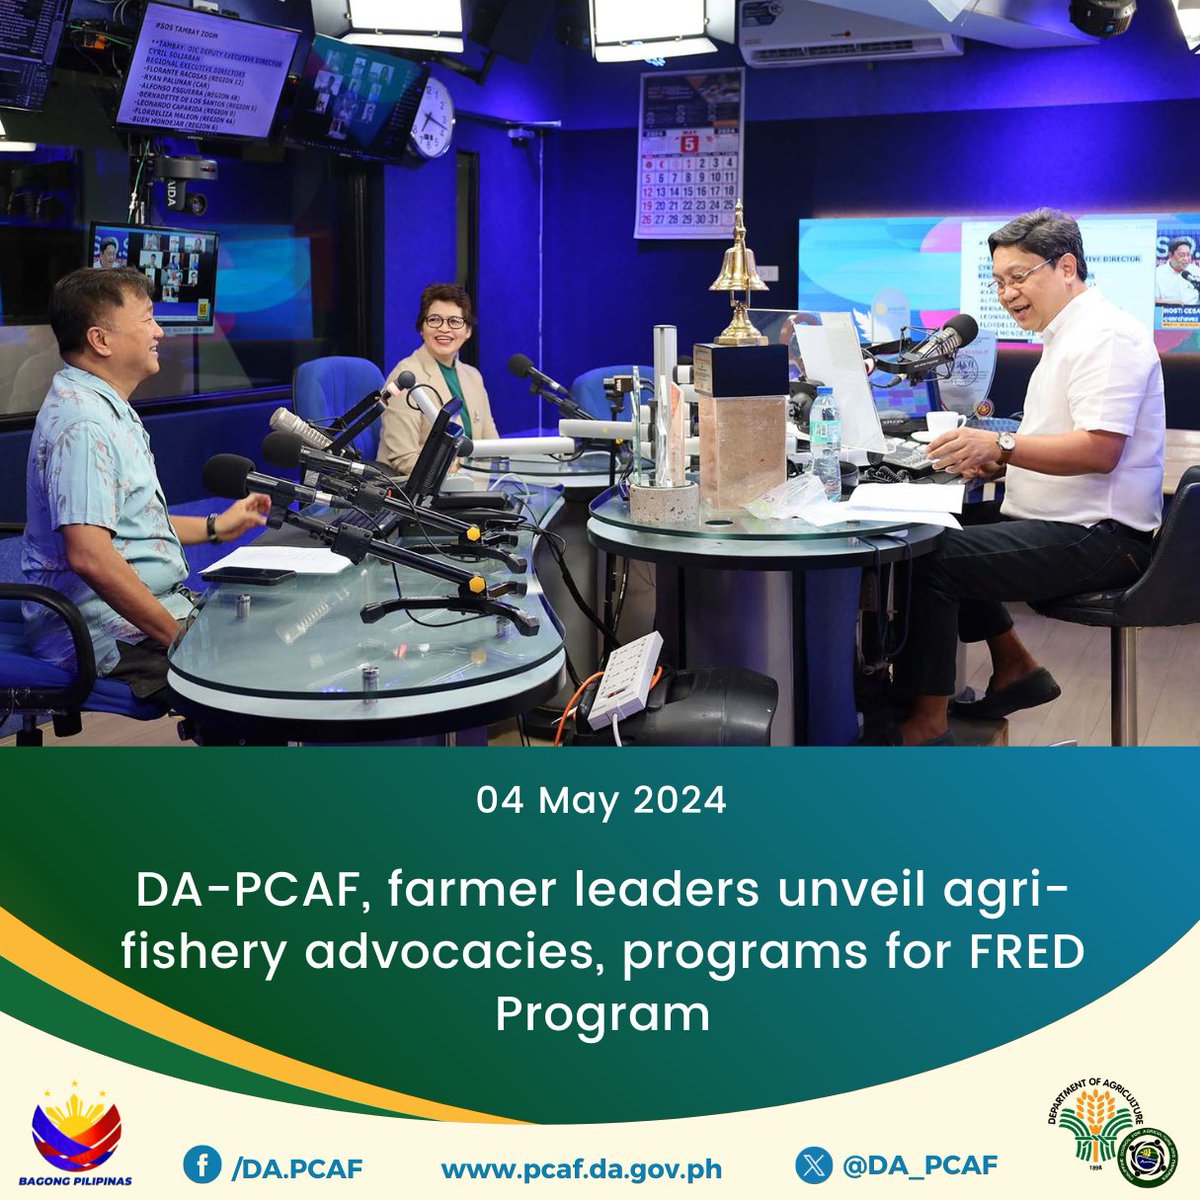 In 2017, as part of the annual Farmers’ & Fisherfolks’ Month celebration, the Philippine Council for Agriculture and Fisheries (PCAF) launched the FRED Program to strengthen the partnership bet the private sector & the government in developing the agriculture & fisheries sectors.